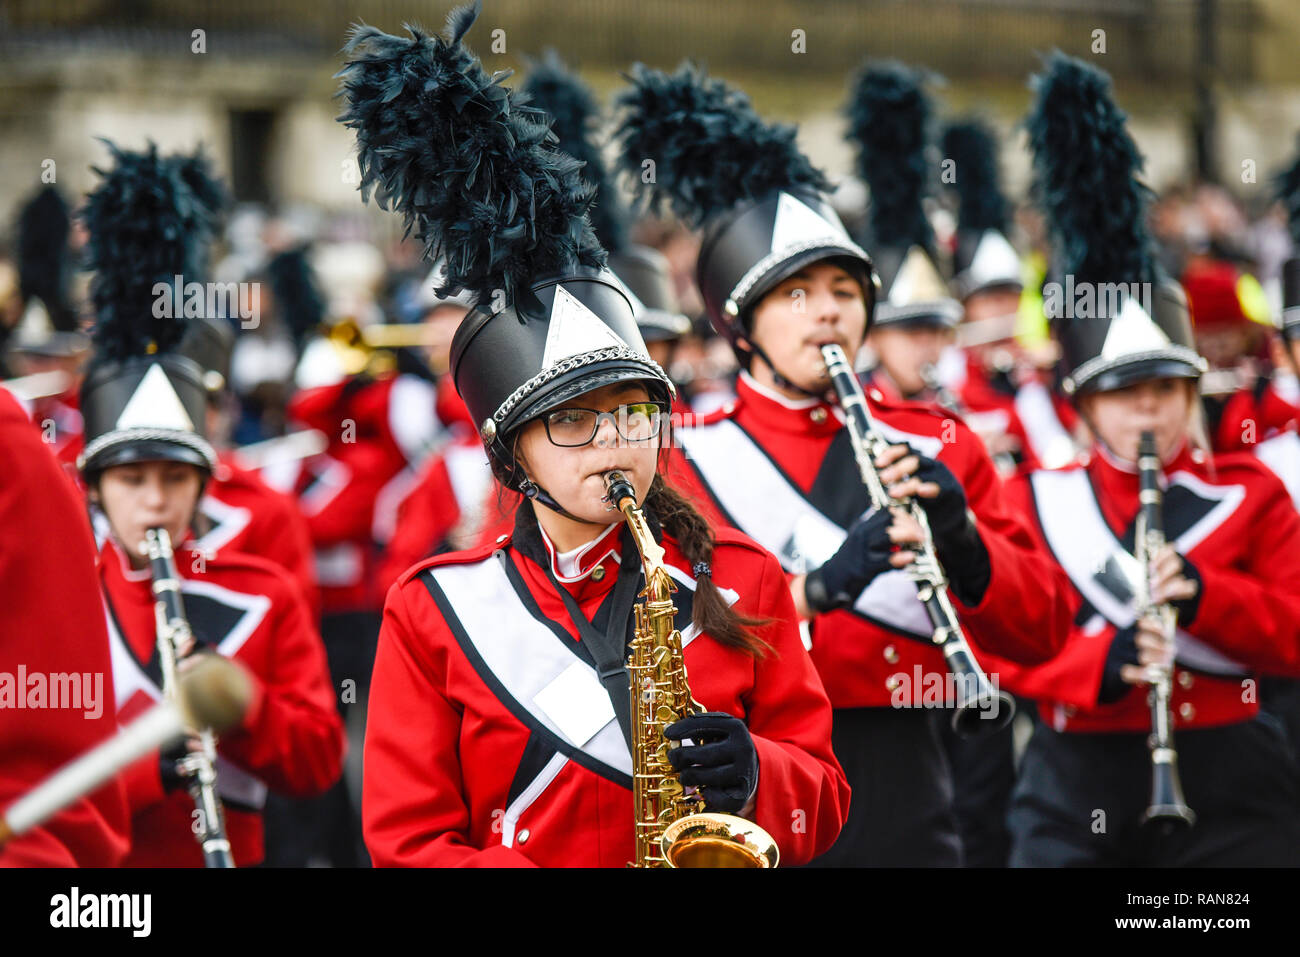 100 Seabreeze High School Marching Band aus Florida, USA, am Tag der Londoner New Year's Parade, UK. Weibliche Bandmitglied Stockfoto